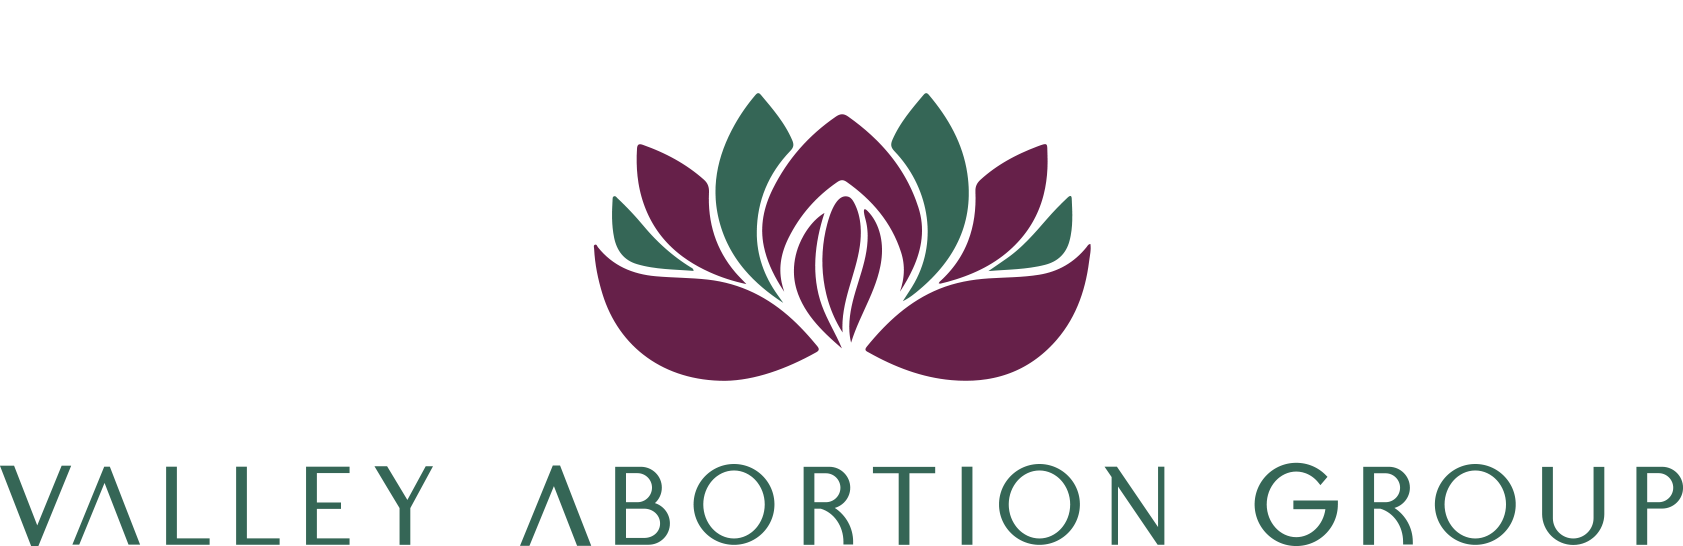 Valley Abortion Group